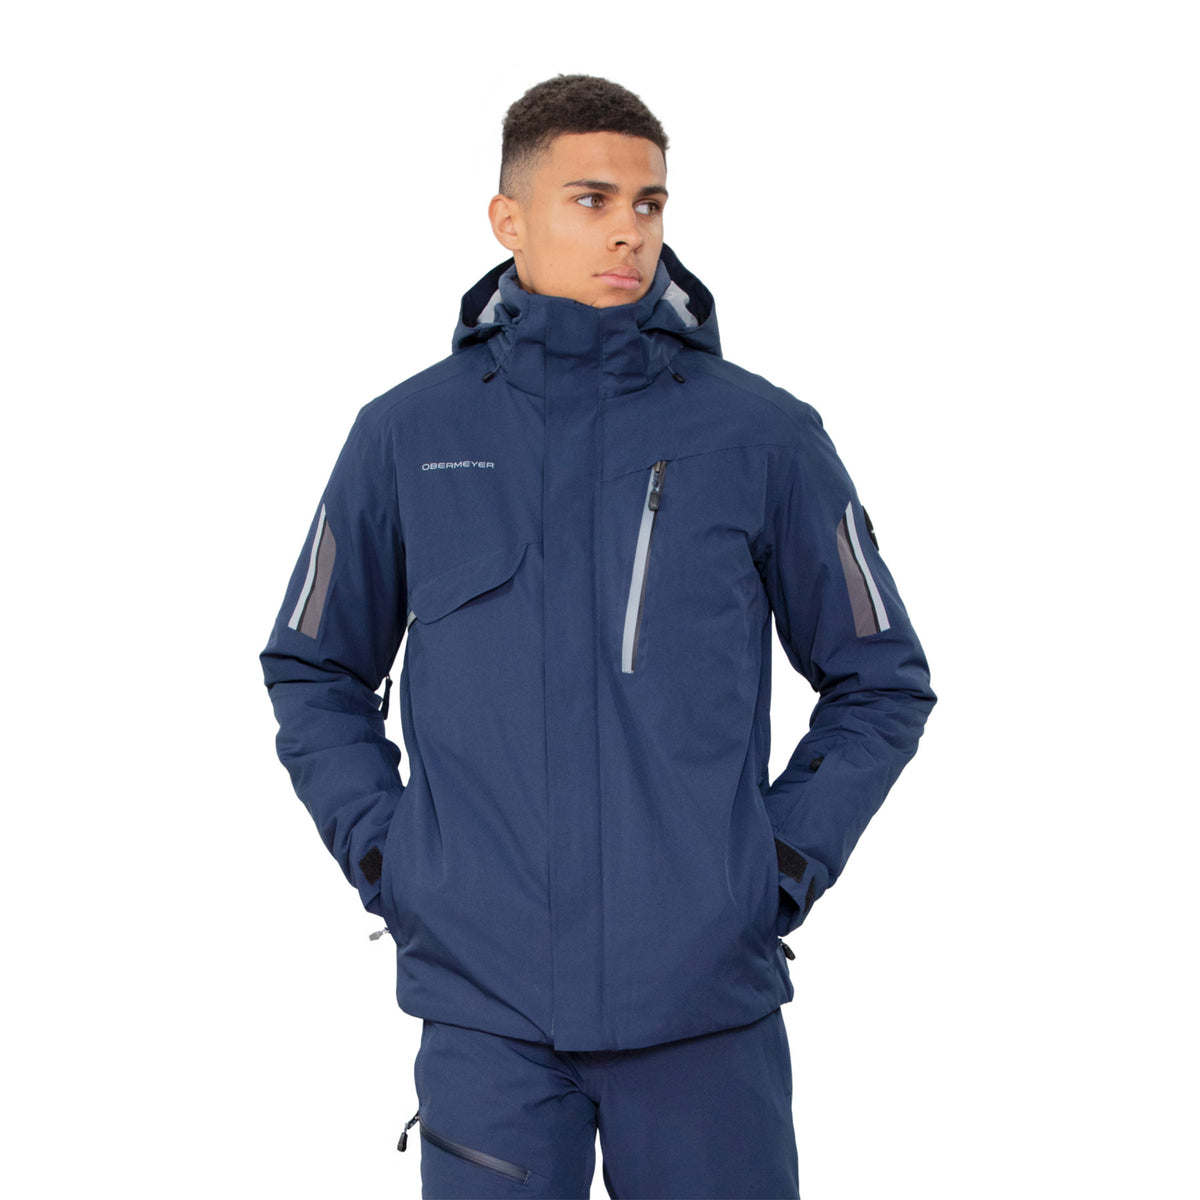 Hero images featuring a male model wearing the Obermeyer Primo Jacket in admiral blue with light grey trim on the sleeves and chest.